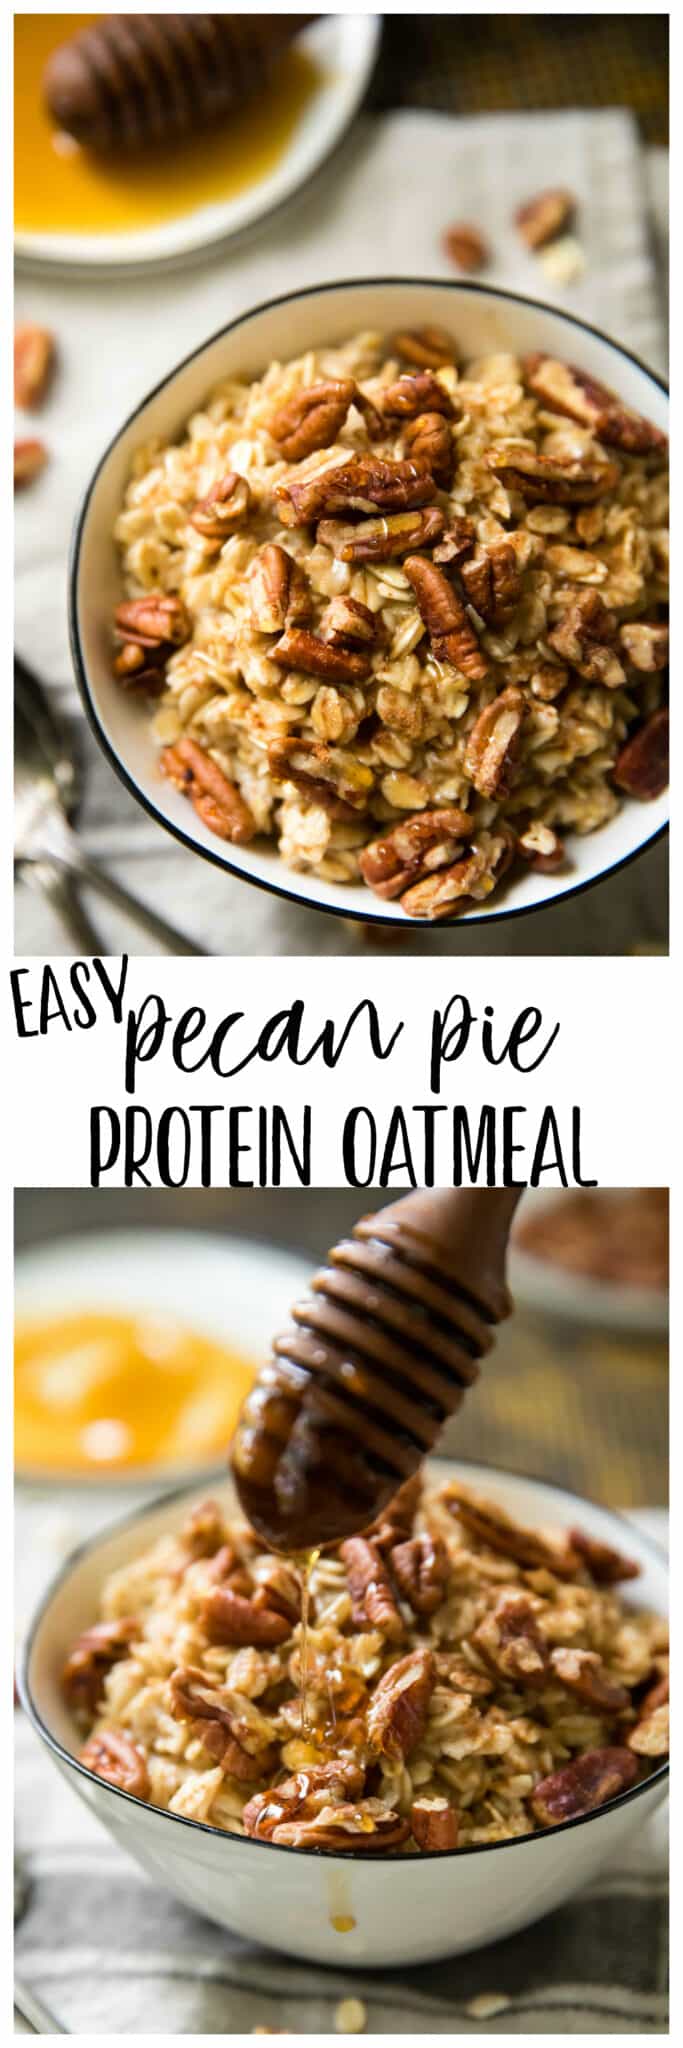 Easy Pecan Pie Protein Oatmeal is a nutritious morning meal packed with protein and loaded with pecan pie yumminess!